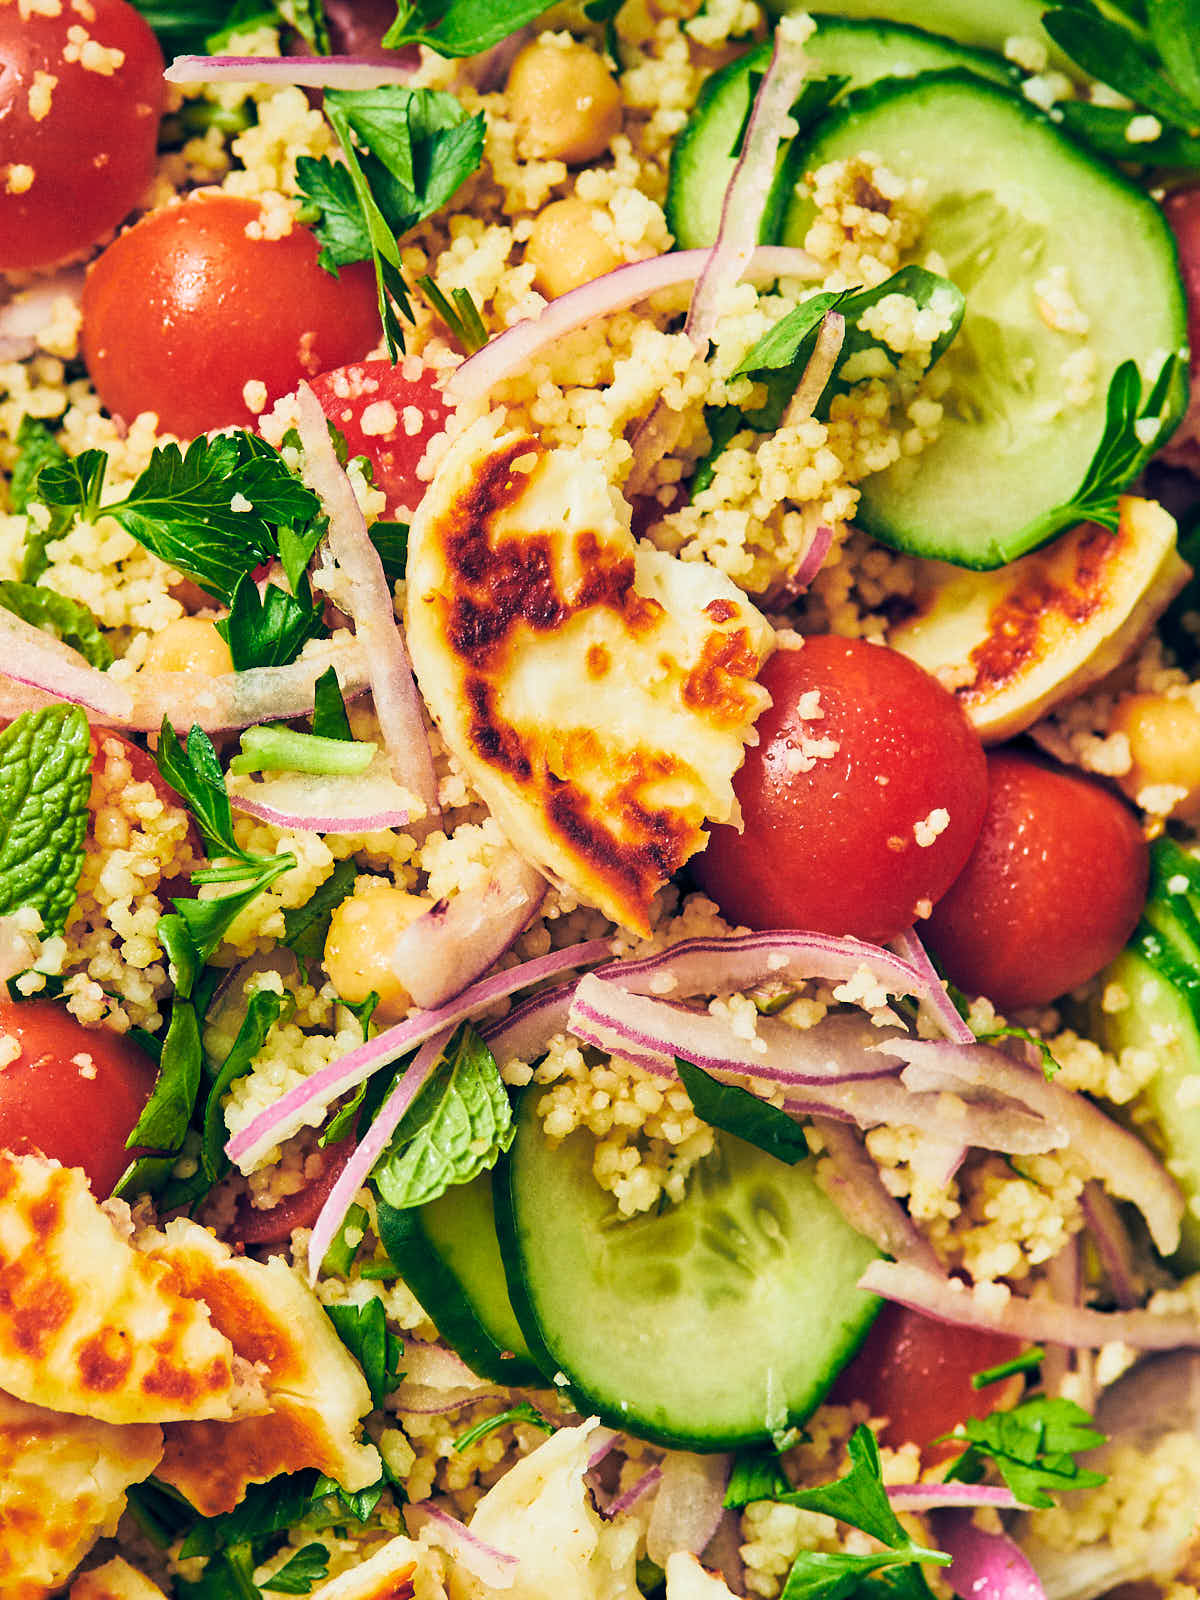 Halloumi Couscous Salad with sliced cucumbers, red onion, tomatoes, parsley, basil, mint, and seared halloumi cheese.